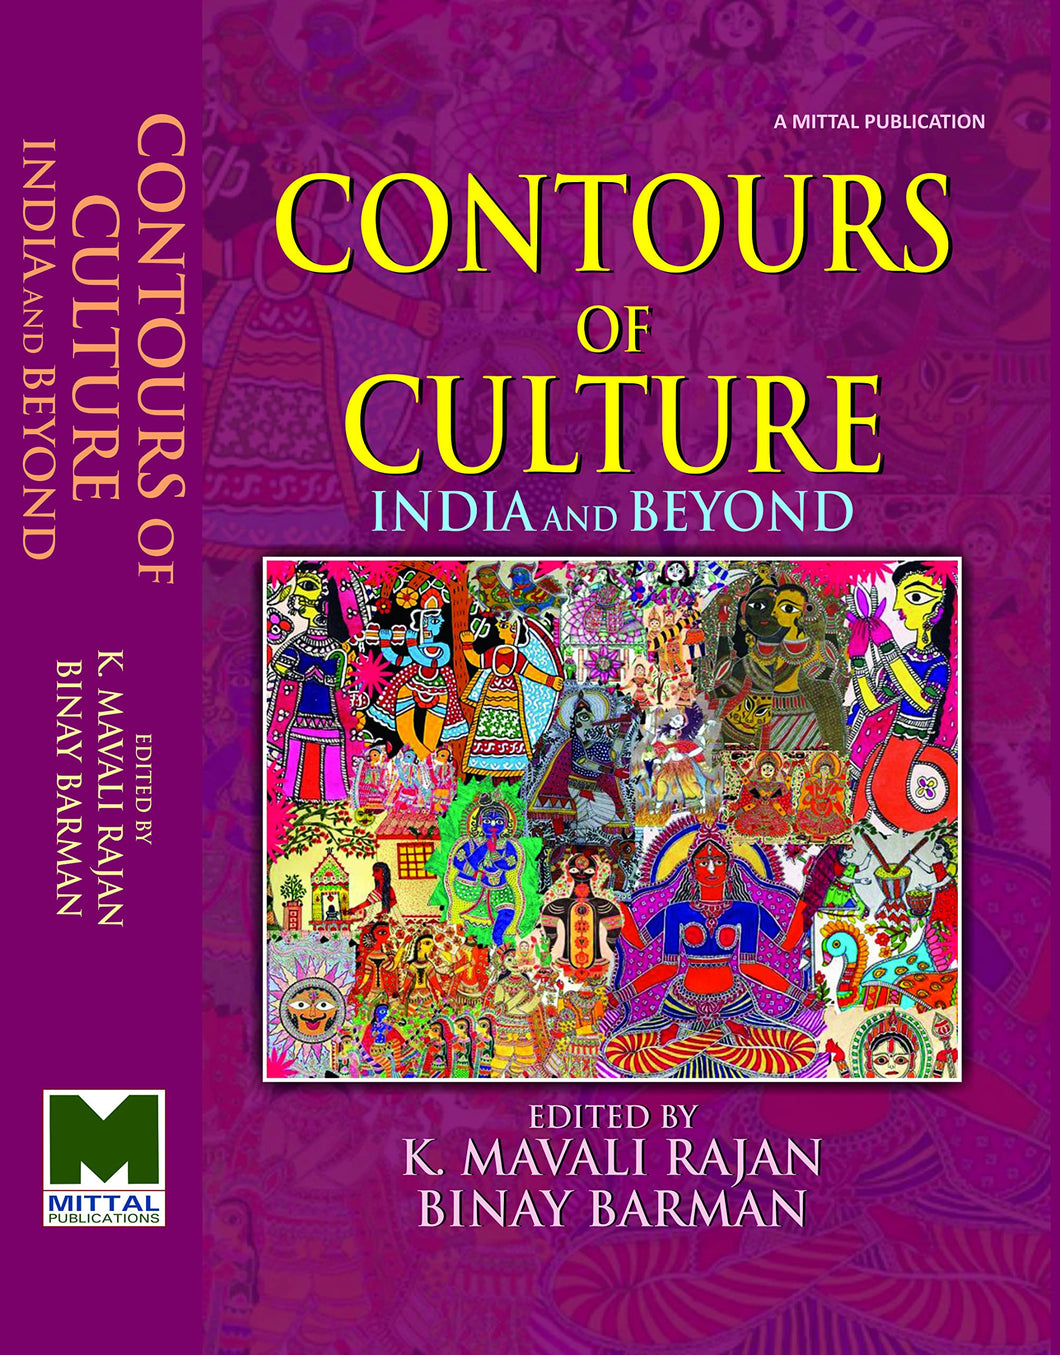 Contours of Cultures: India and Beyond- Essays on Culture, Tradition and Religion in South Asia and South-East Asia by K.Mavali Rajan & Binay Barman